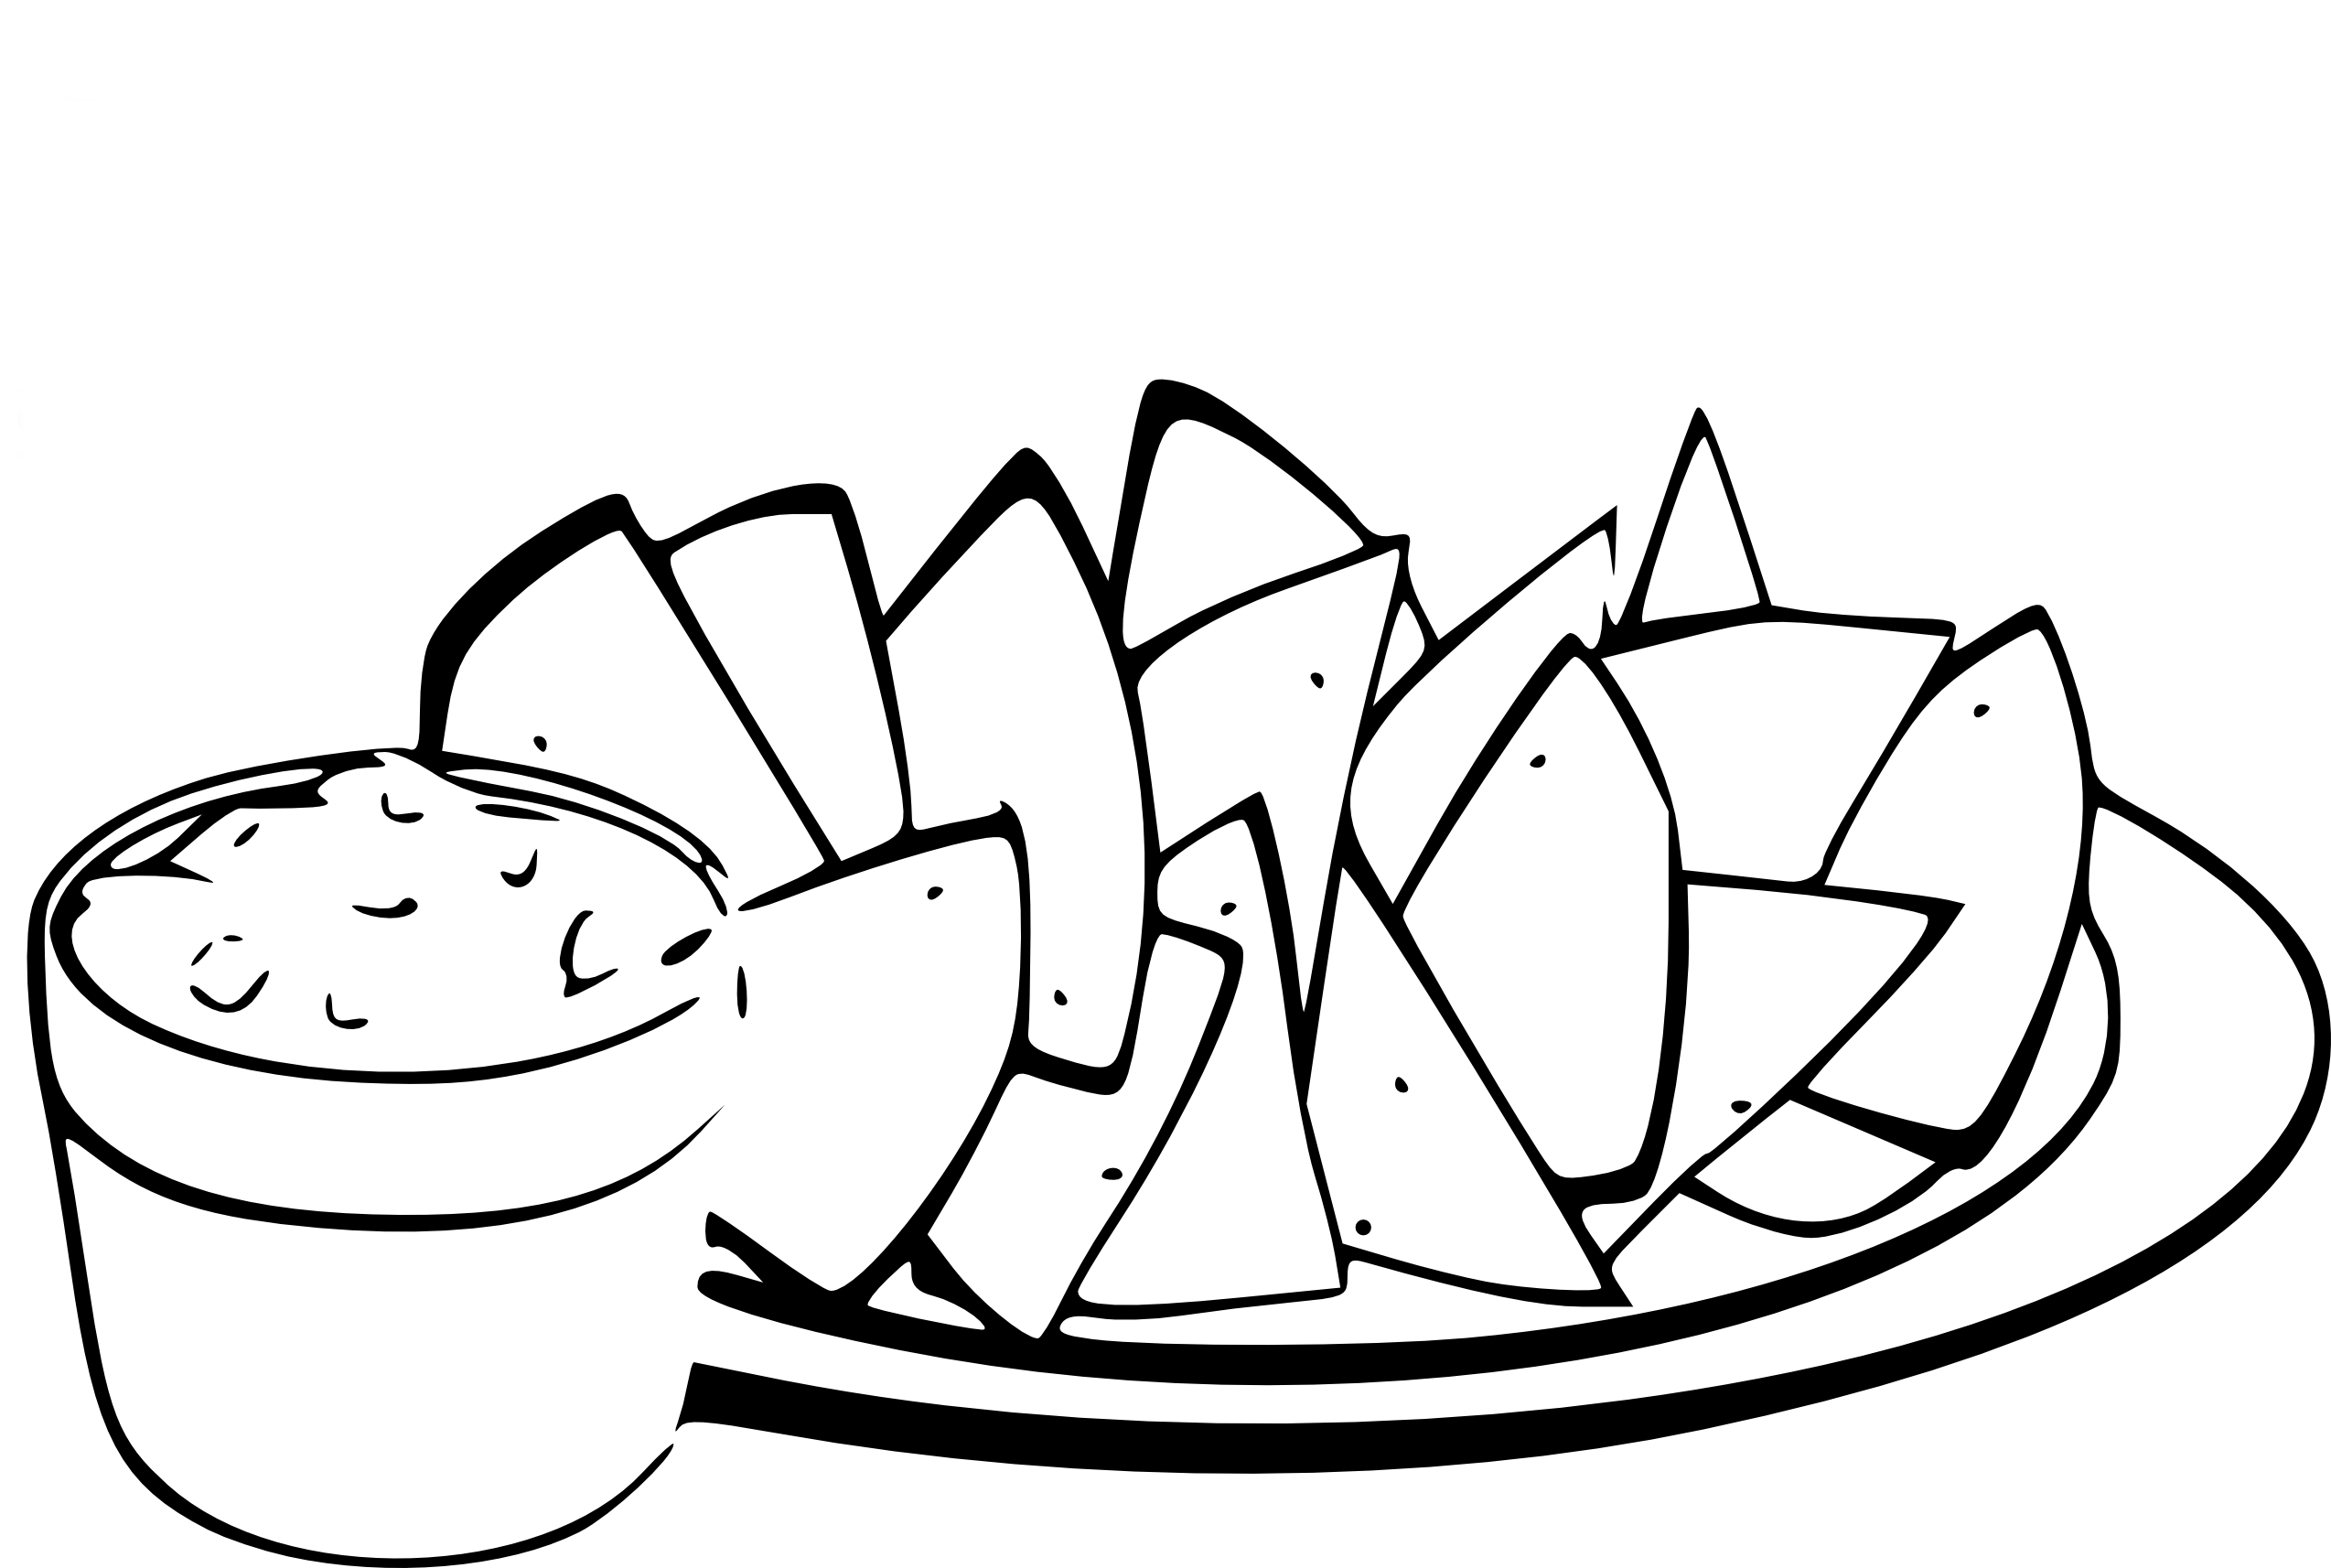 Mexican Cuisine coloring page - free printable coloring pages on coloori.com